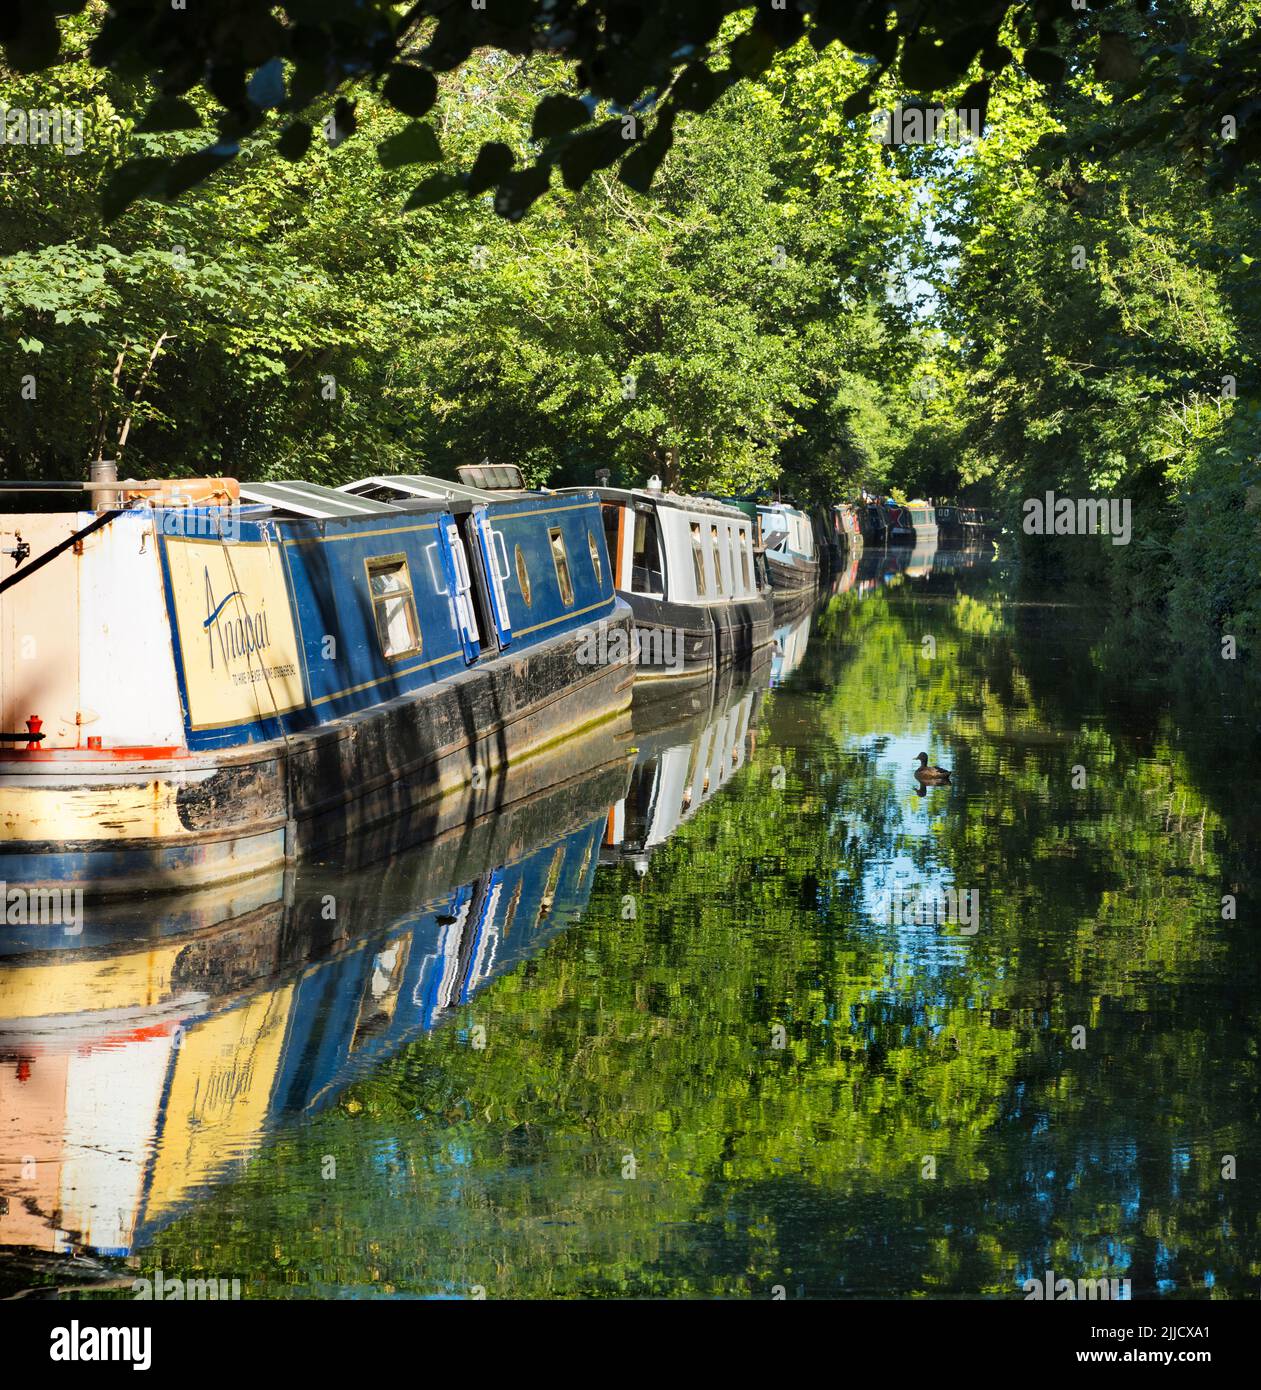 Puttering around on houseboats is a quintessentially English leisure tradition. Oxford's waterways, canals, streams and rivers are a source of many tr Stock Photo